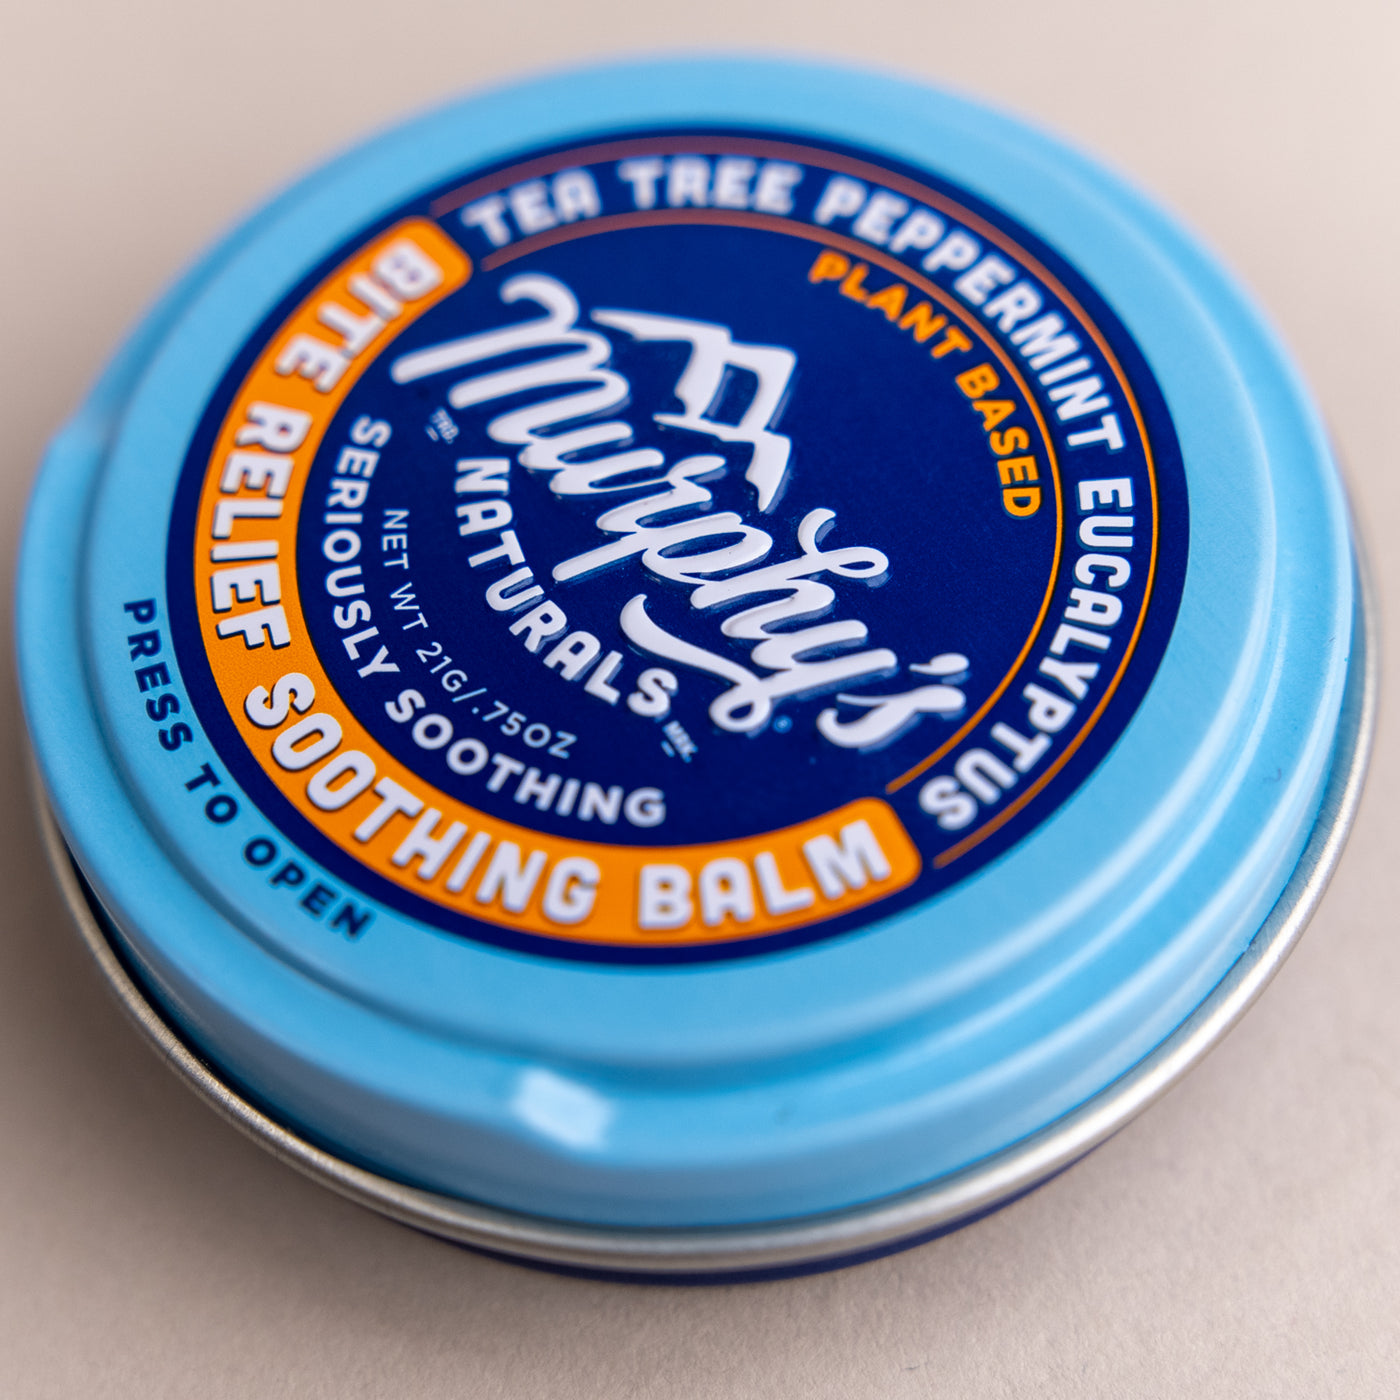 Murphy's Natural Soothing Bite Relief Balm